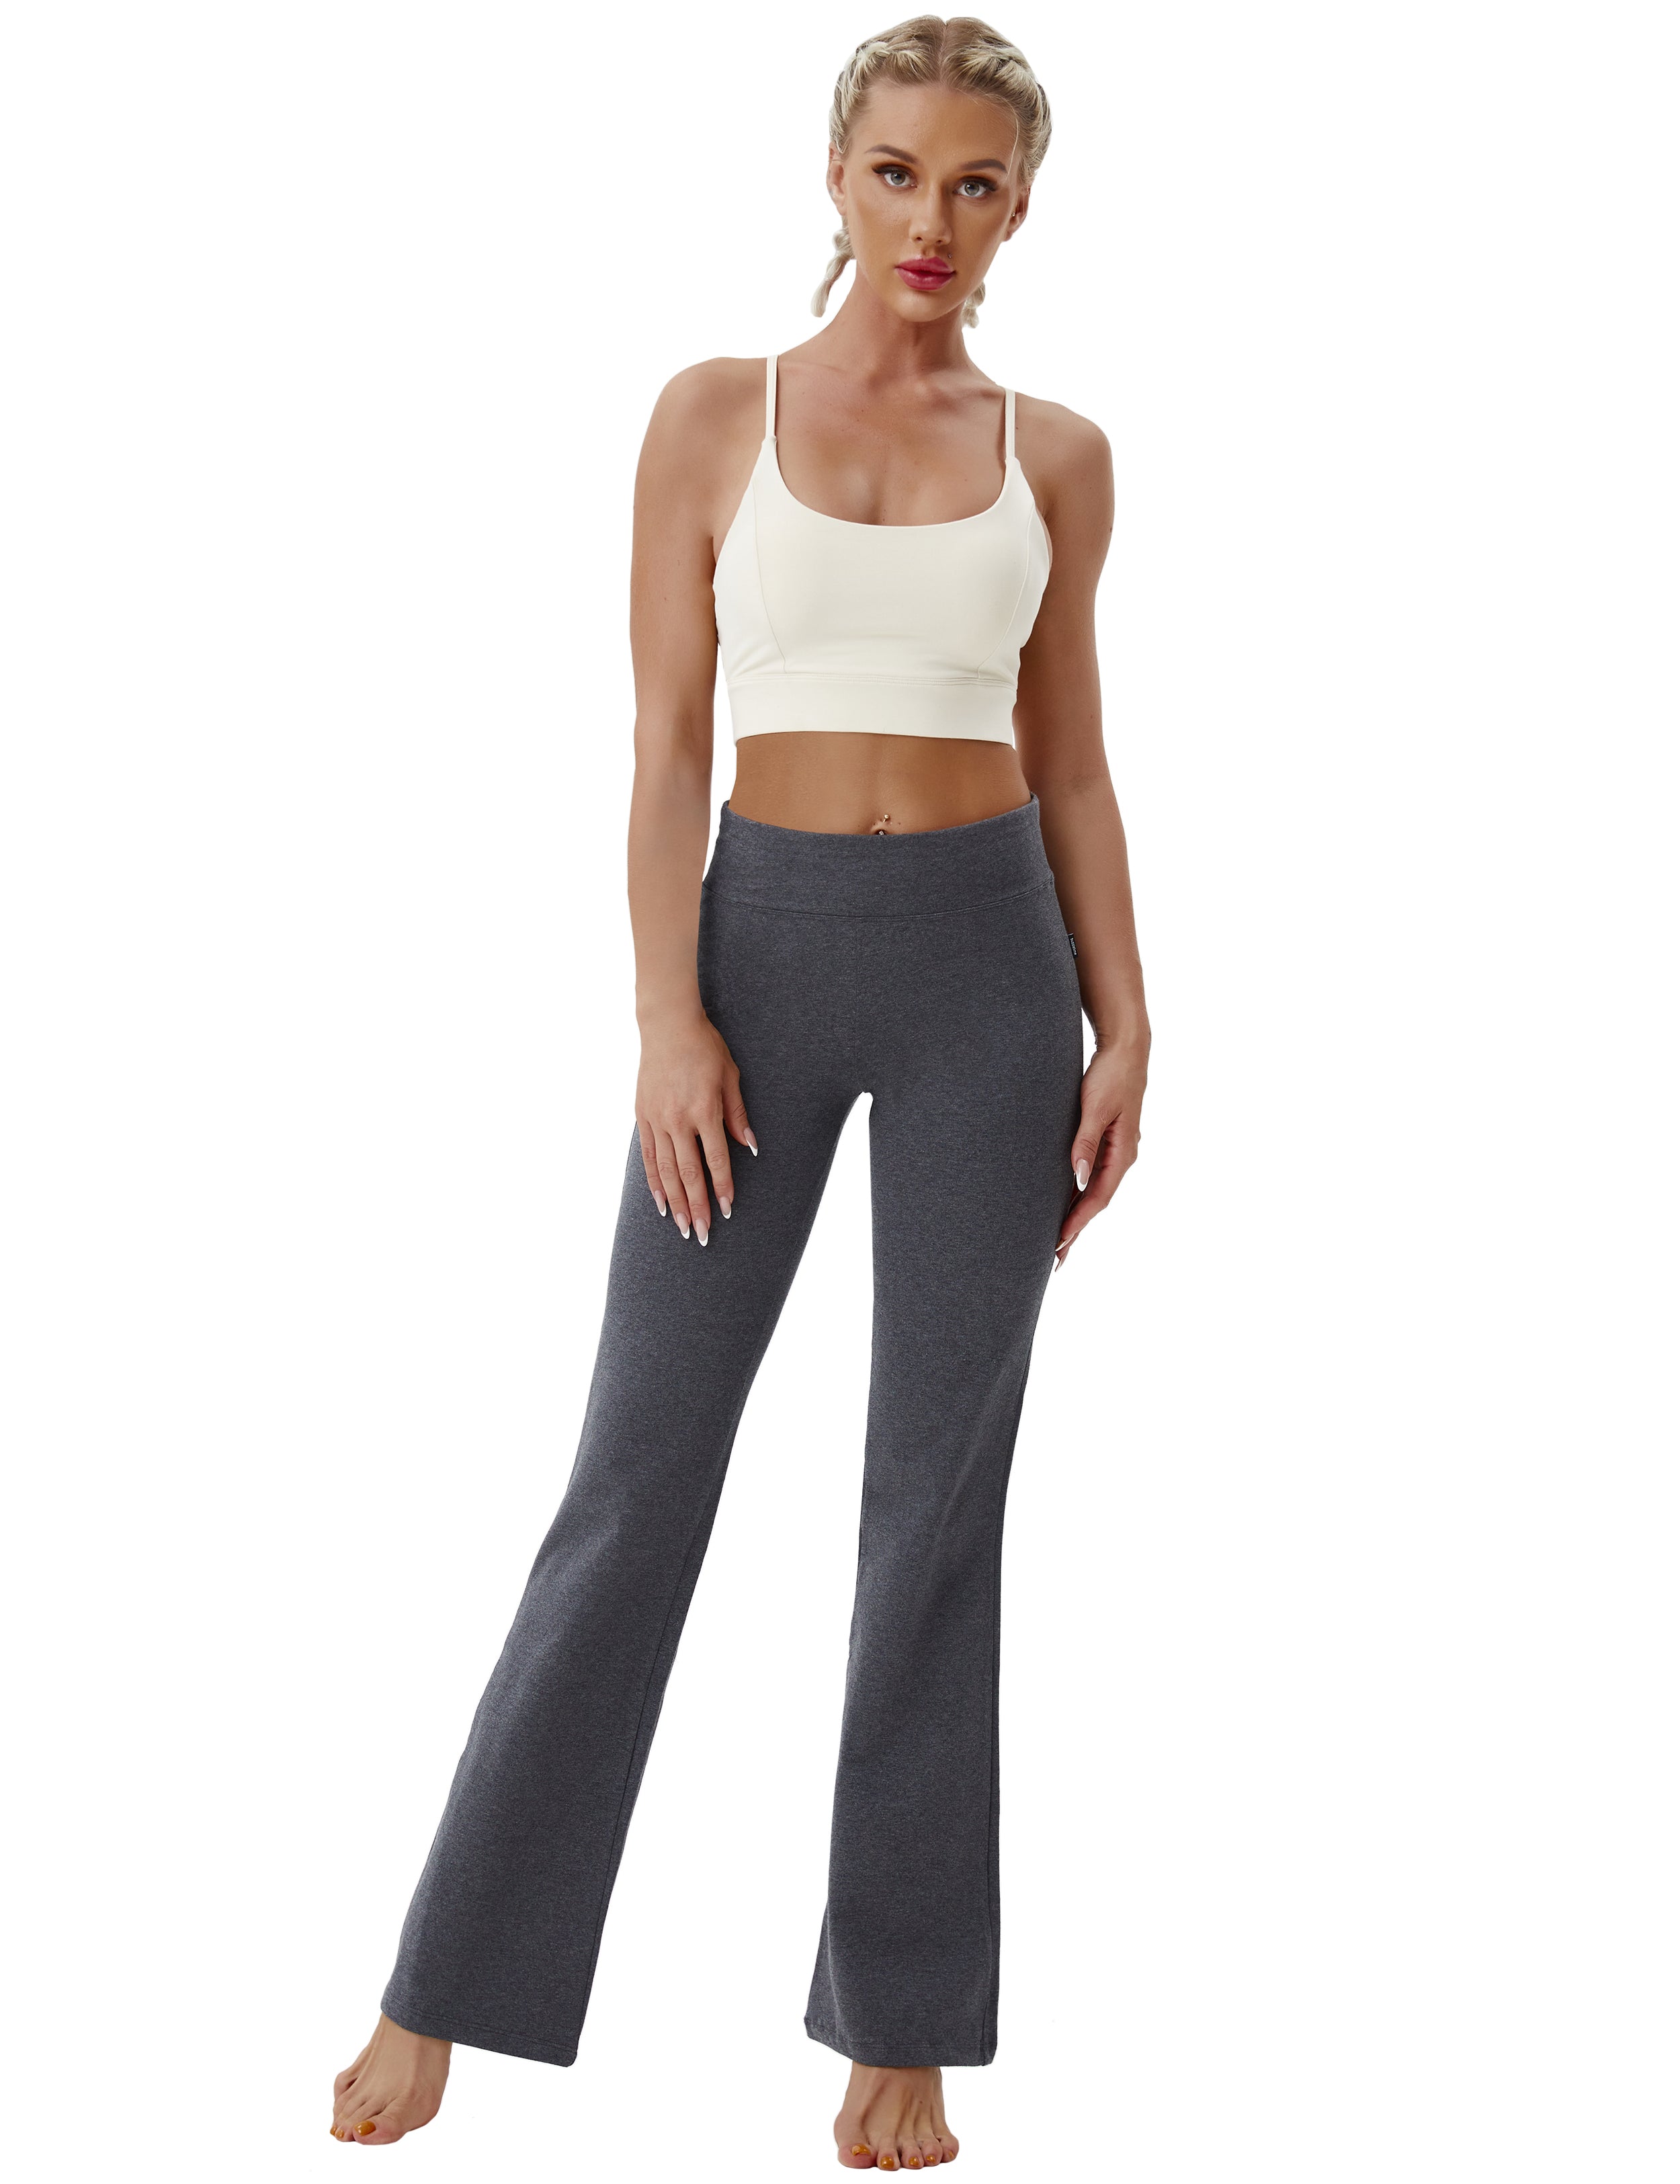 Cotton Bootcut Leggings heathercharcoal 90%Cotton/10%Spandex (soft and cotton feel) Fabric doesn't attract lint easily 4-way stretch No see-through Moisture-wicking Inner pocket Four lengths